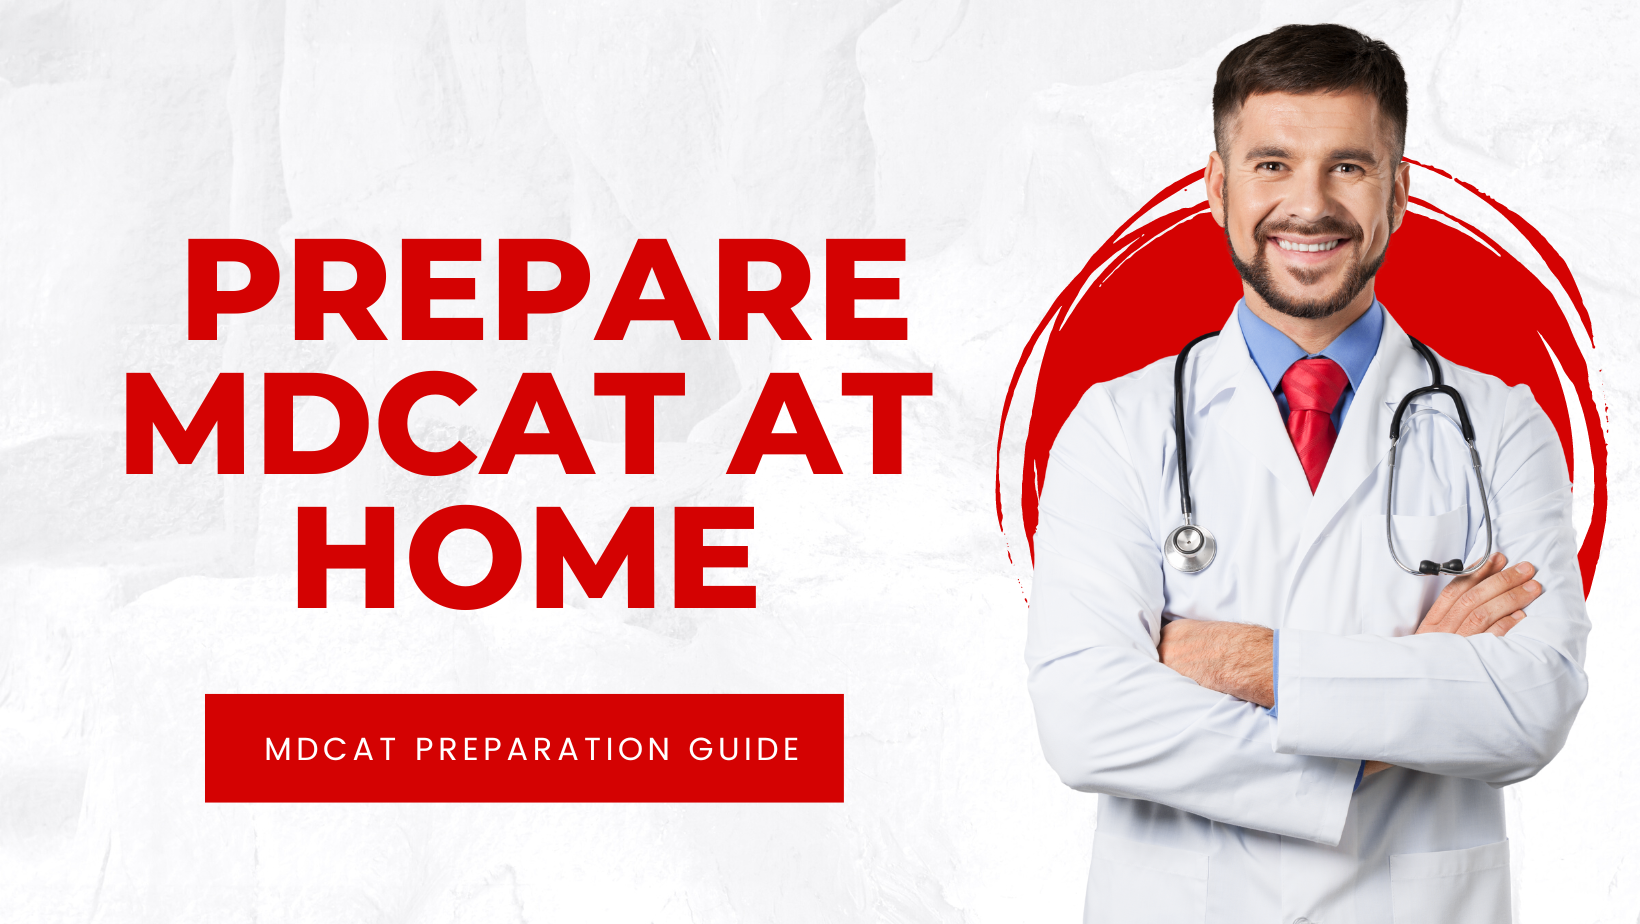 How to Prepare MDCAT at Home